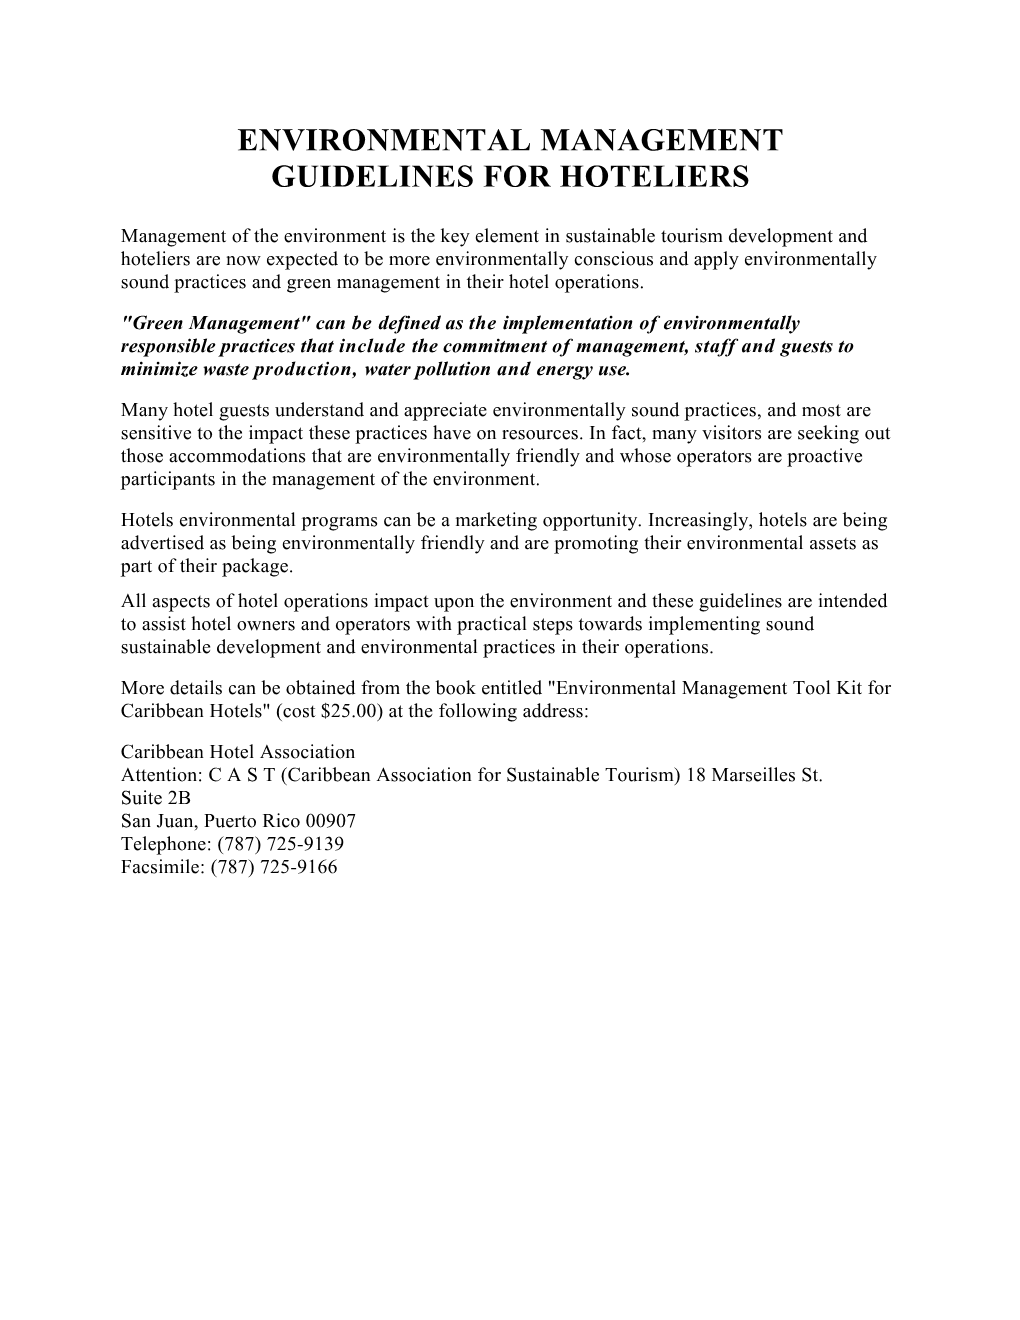 Environmental Management Guidelines for Hoteliers